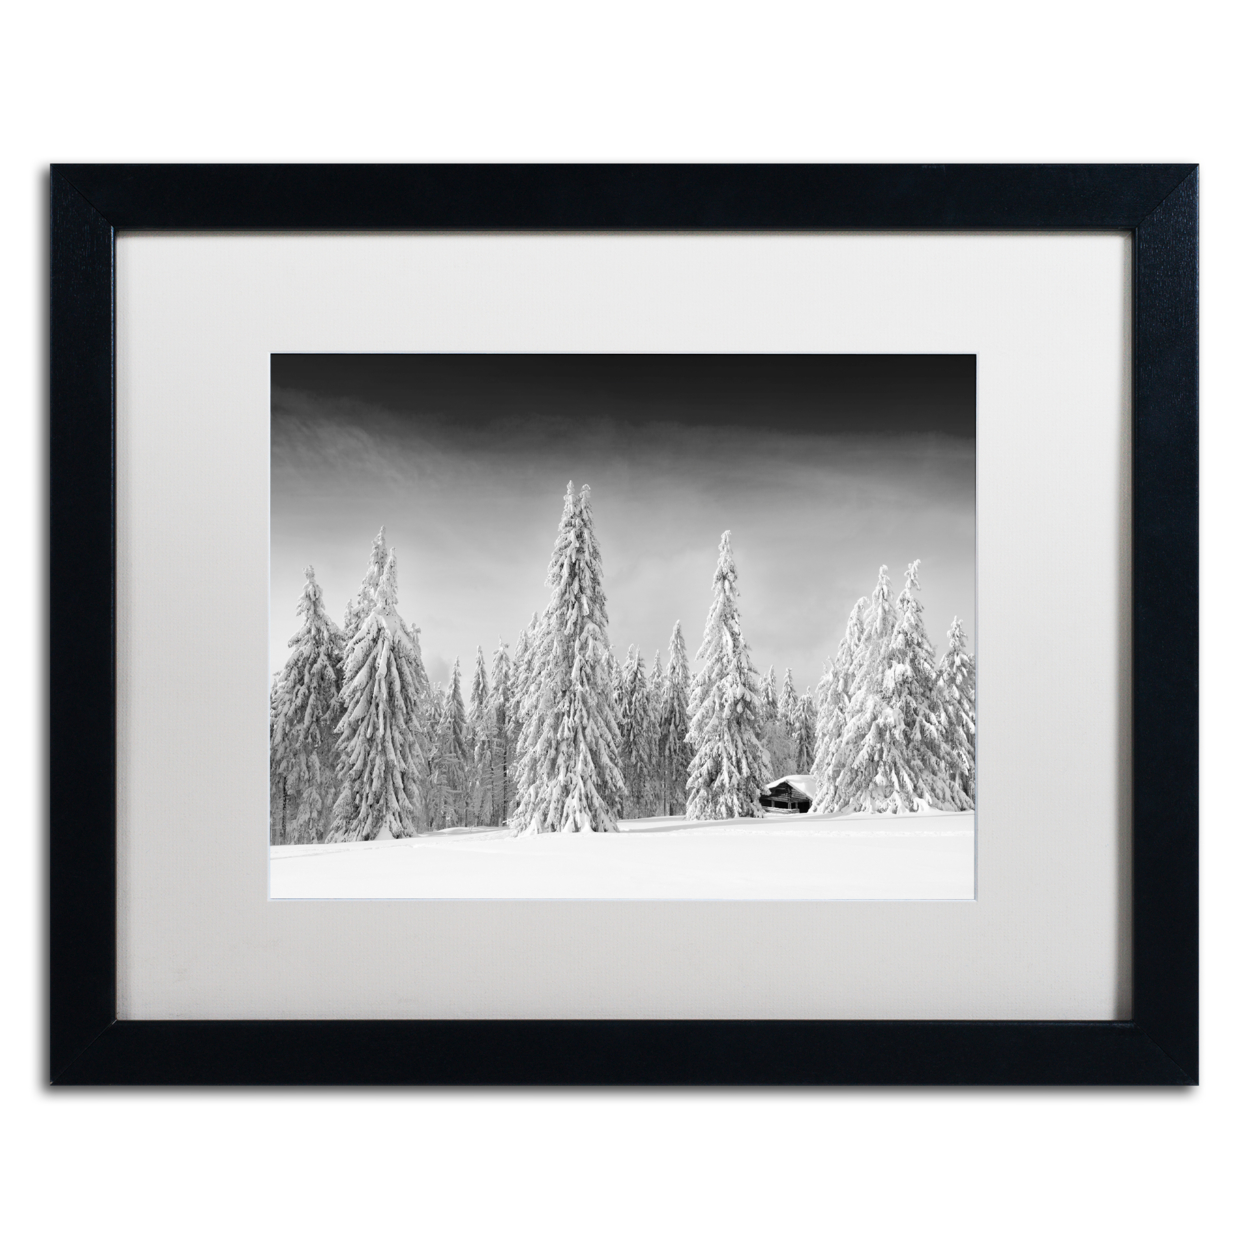 Philippe Sainte-Laudy 'White World' Black Wooden Framed Art 18 X 22 Inches